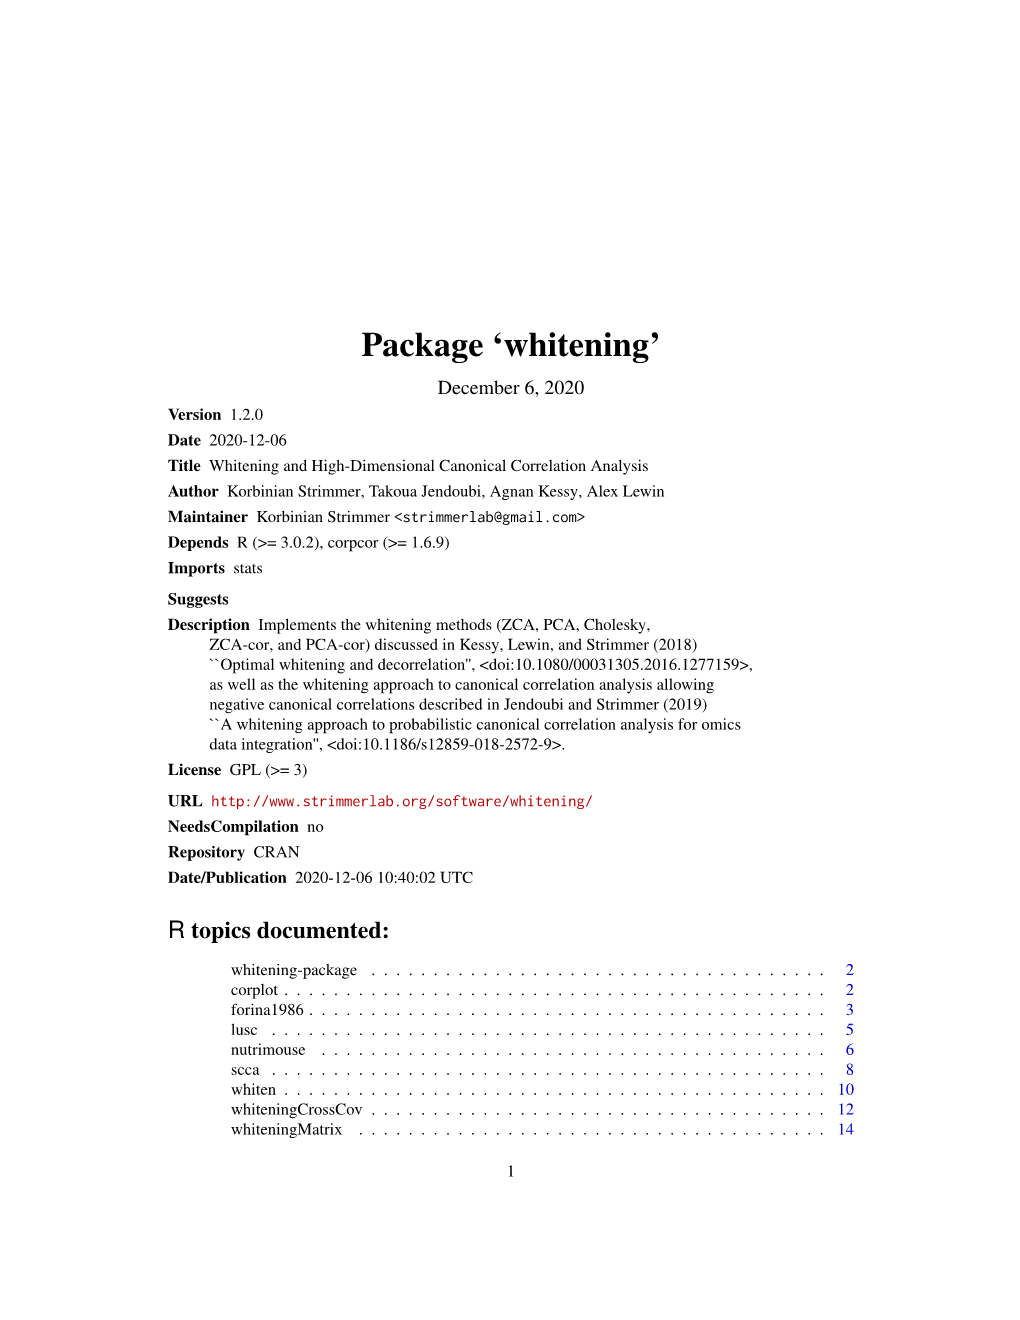 Package 'Whitening'